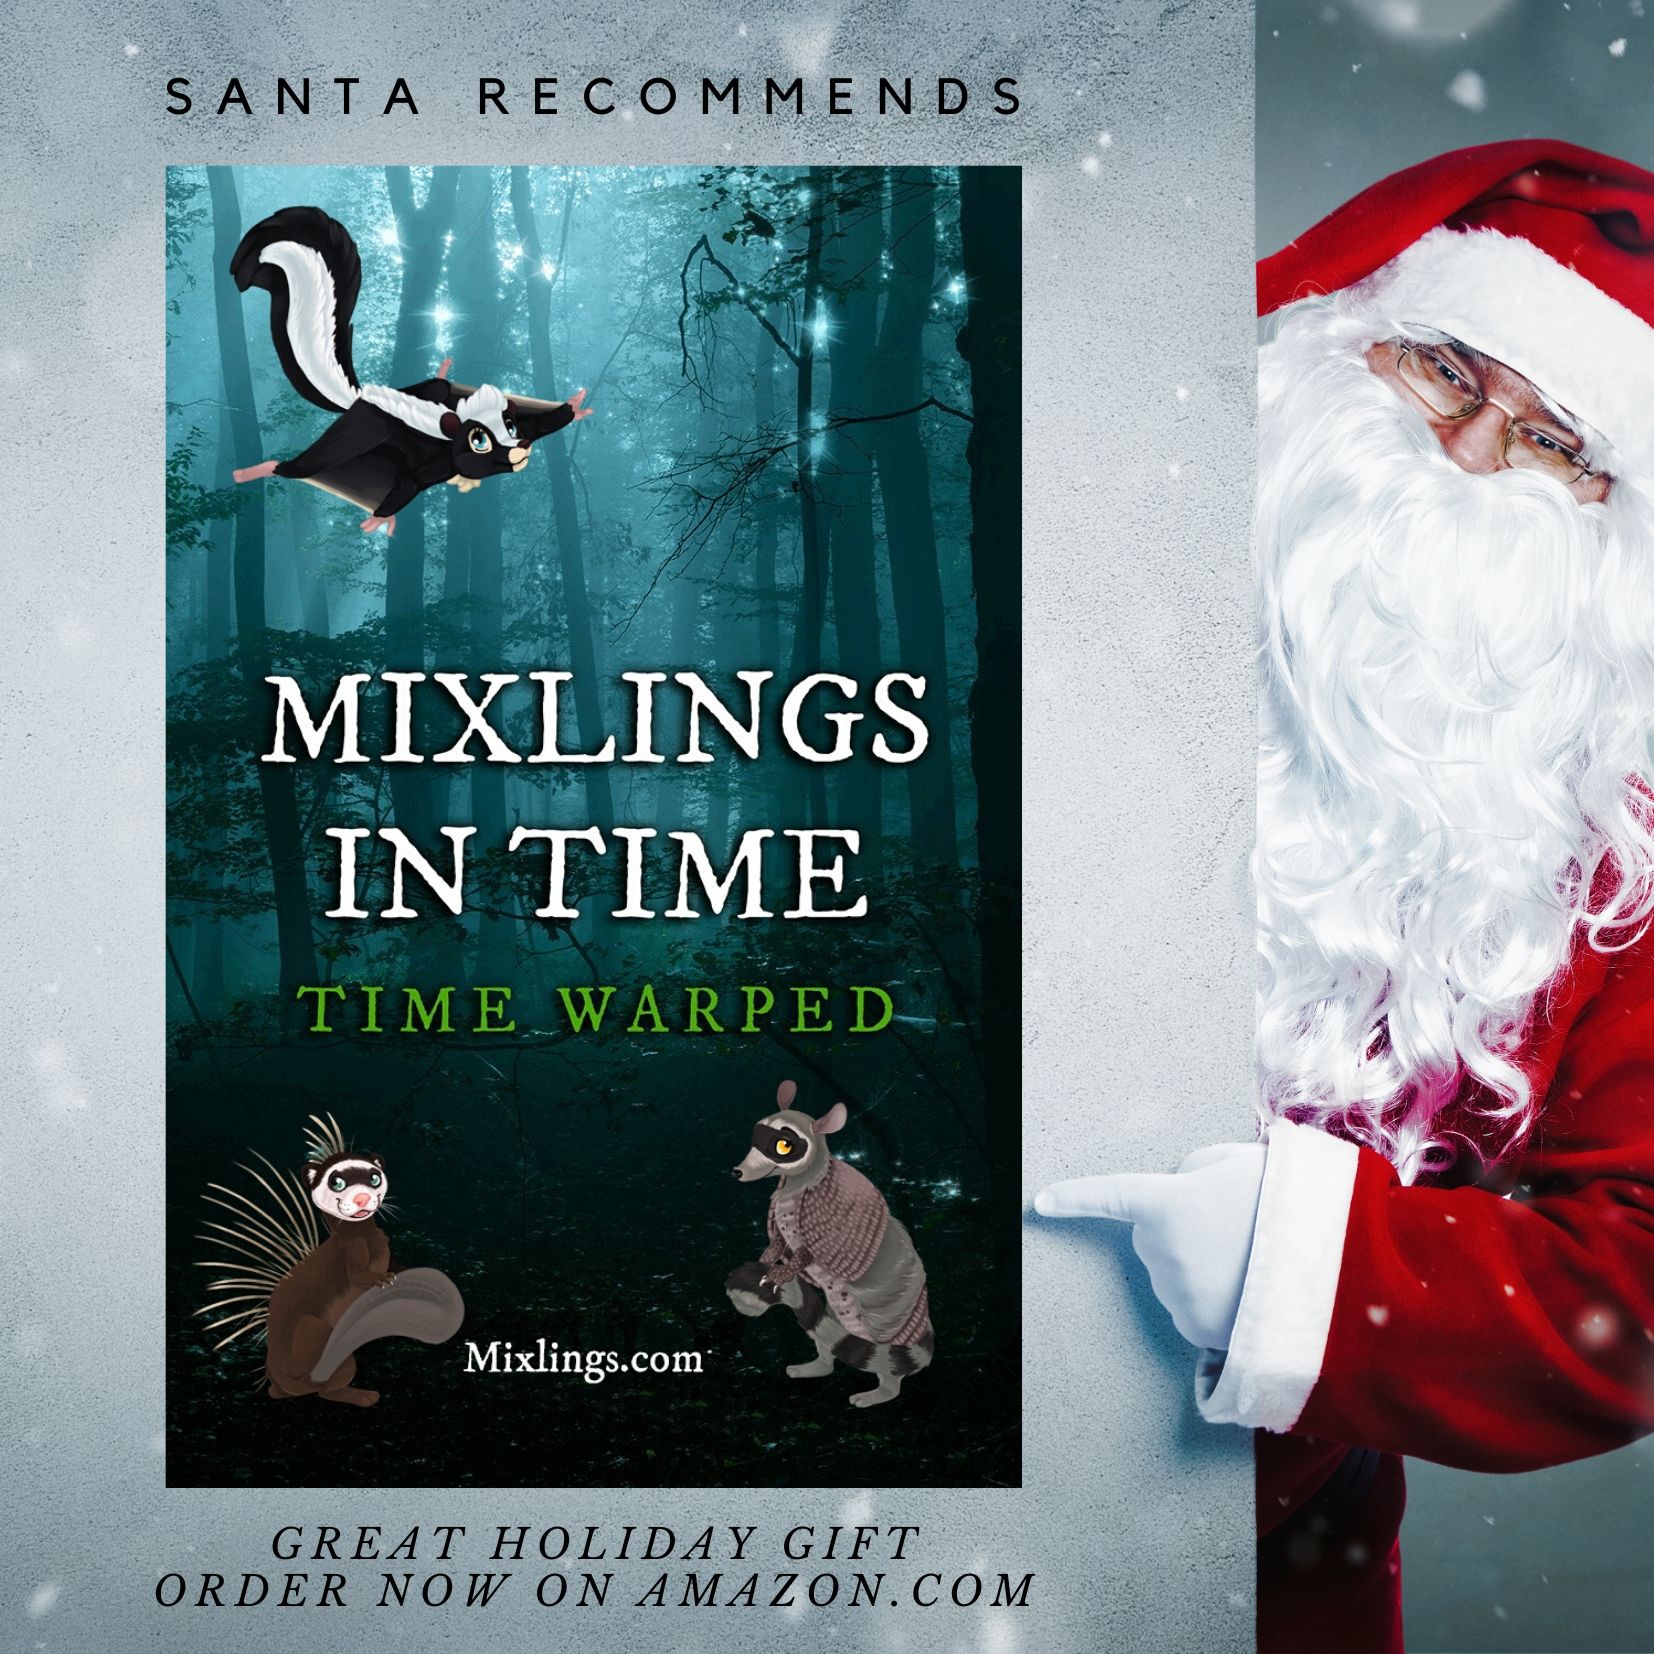 Santa Recommends Mixlings in Time